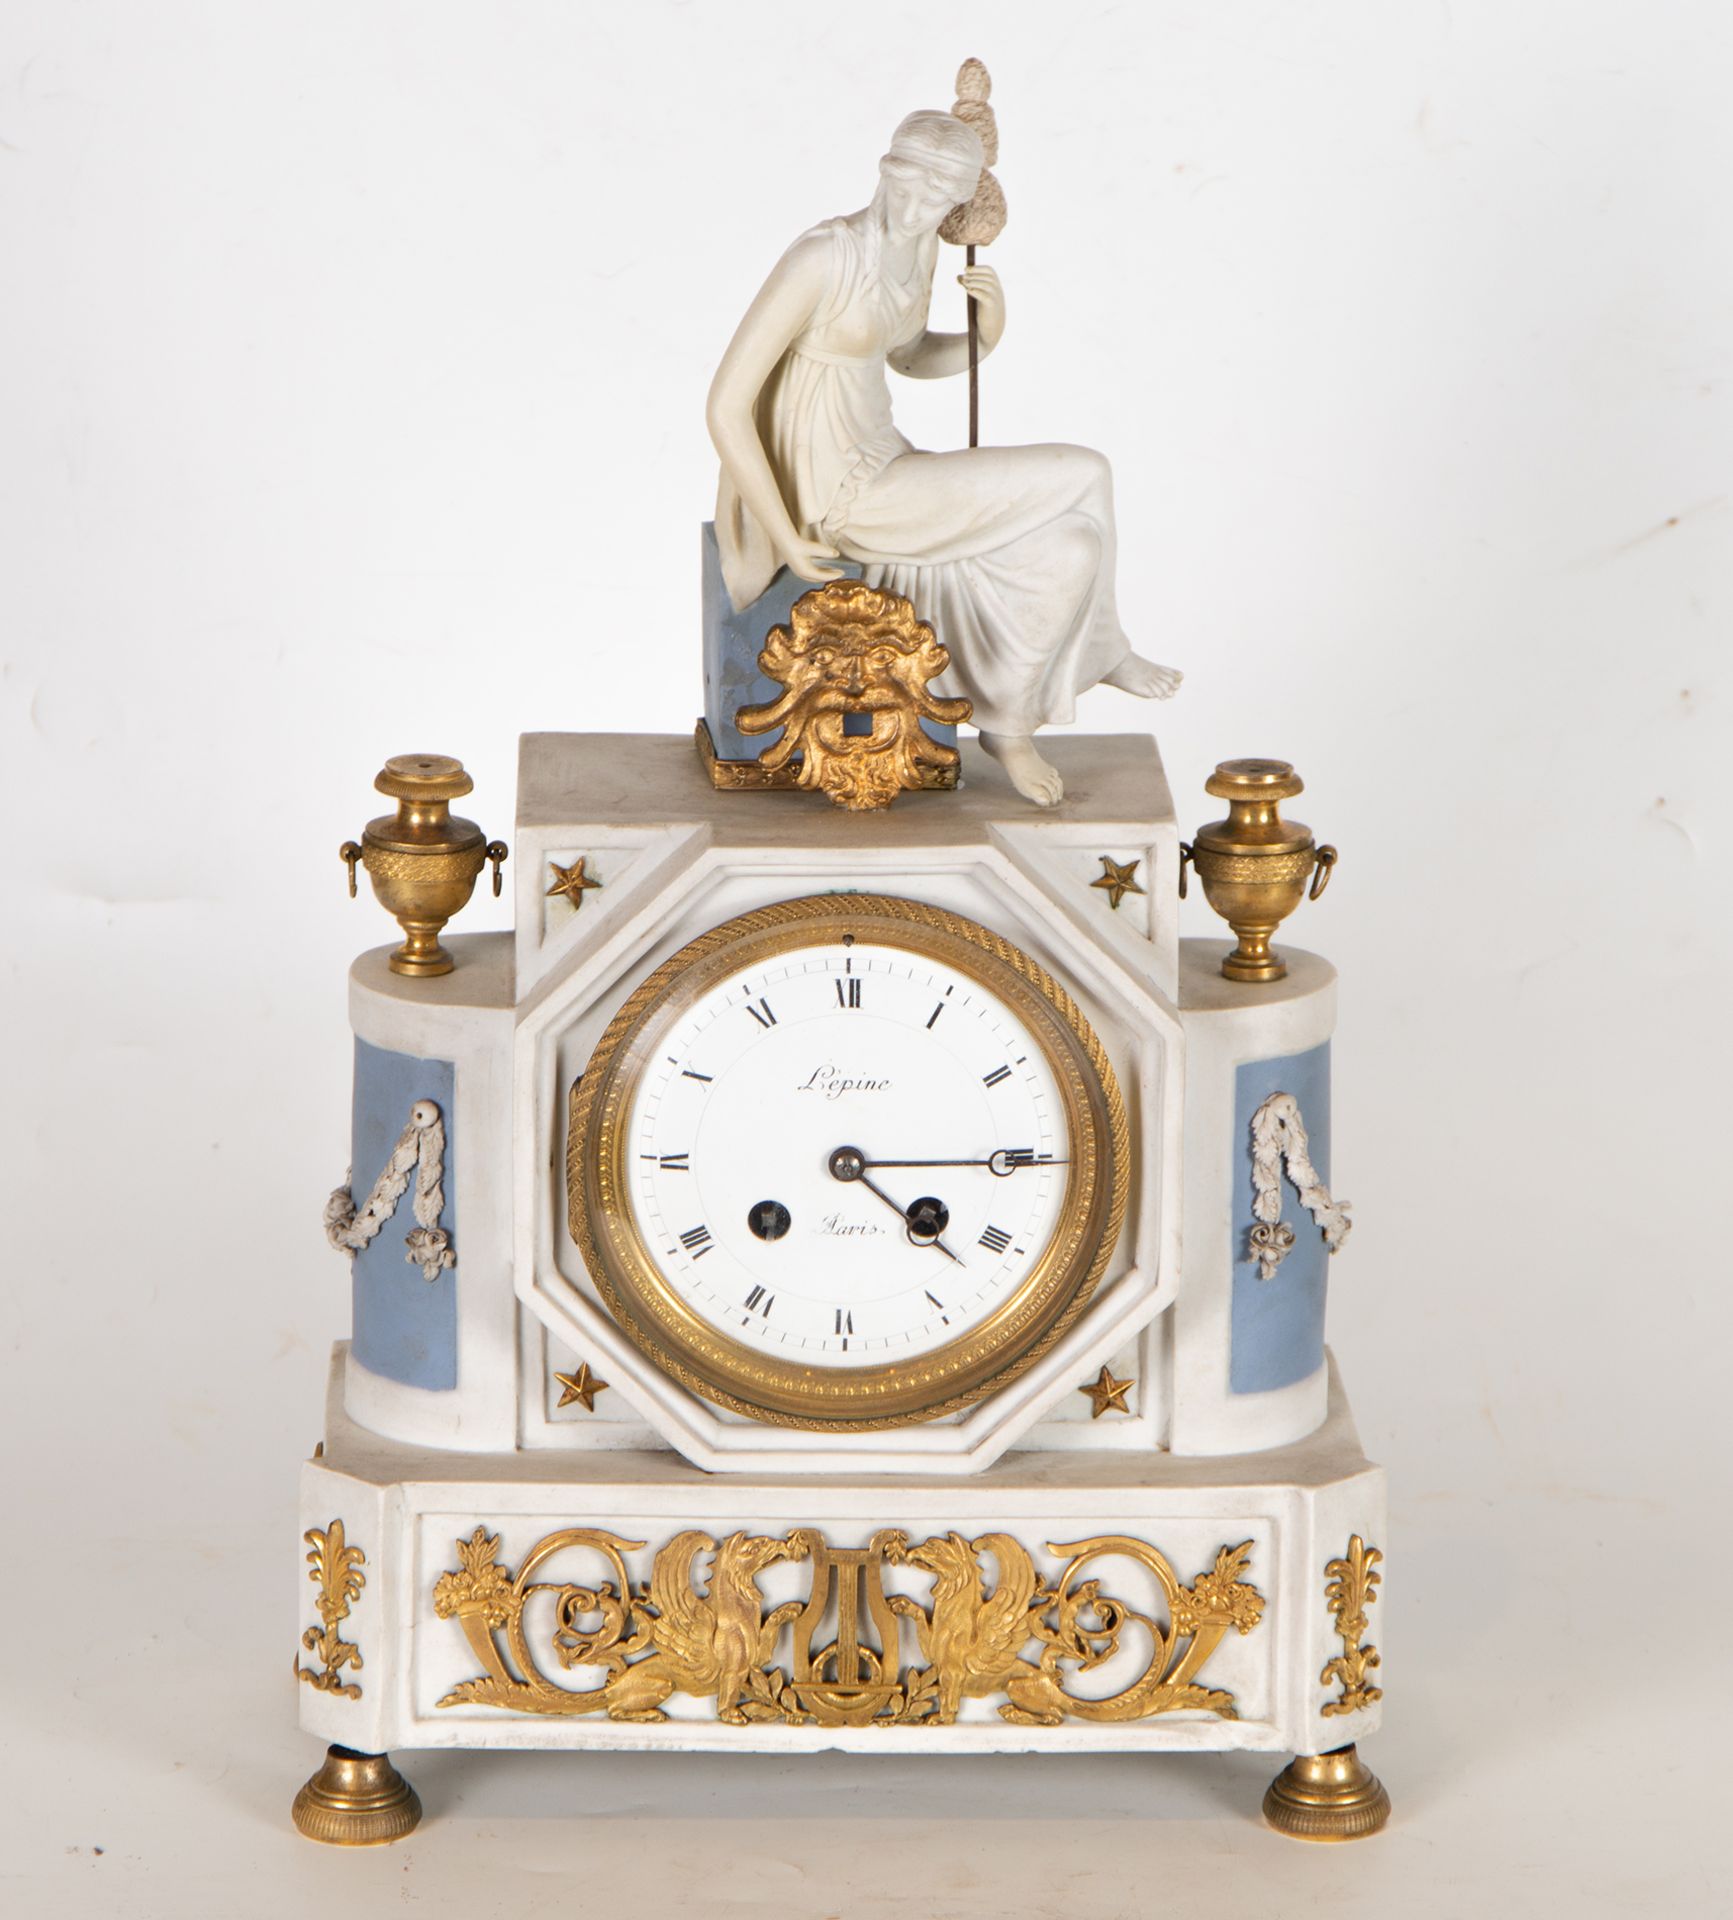 Empire Style Clock in Wedgwood porcelain and gilt bronze, 19th century French school